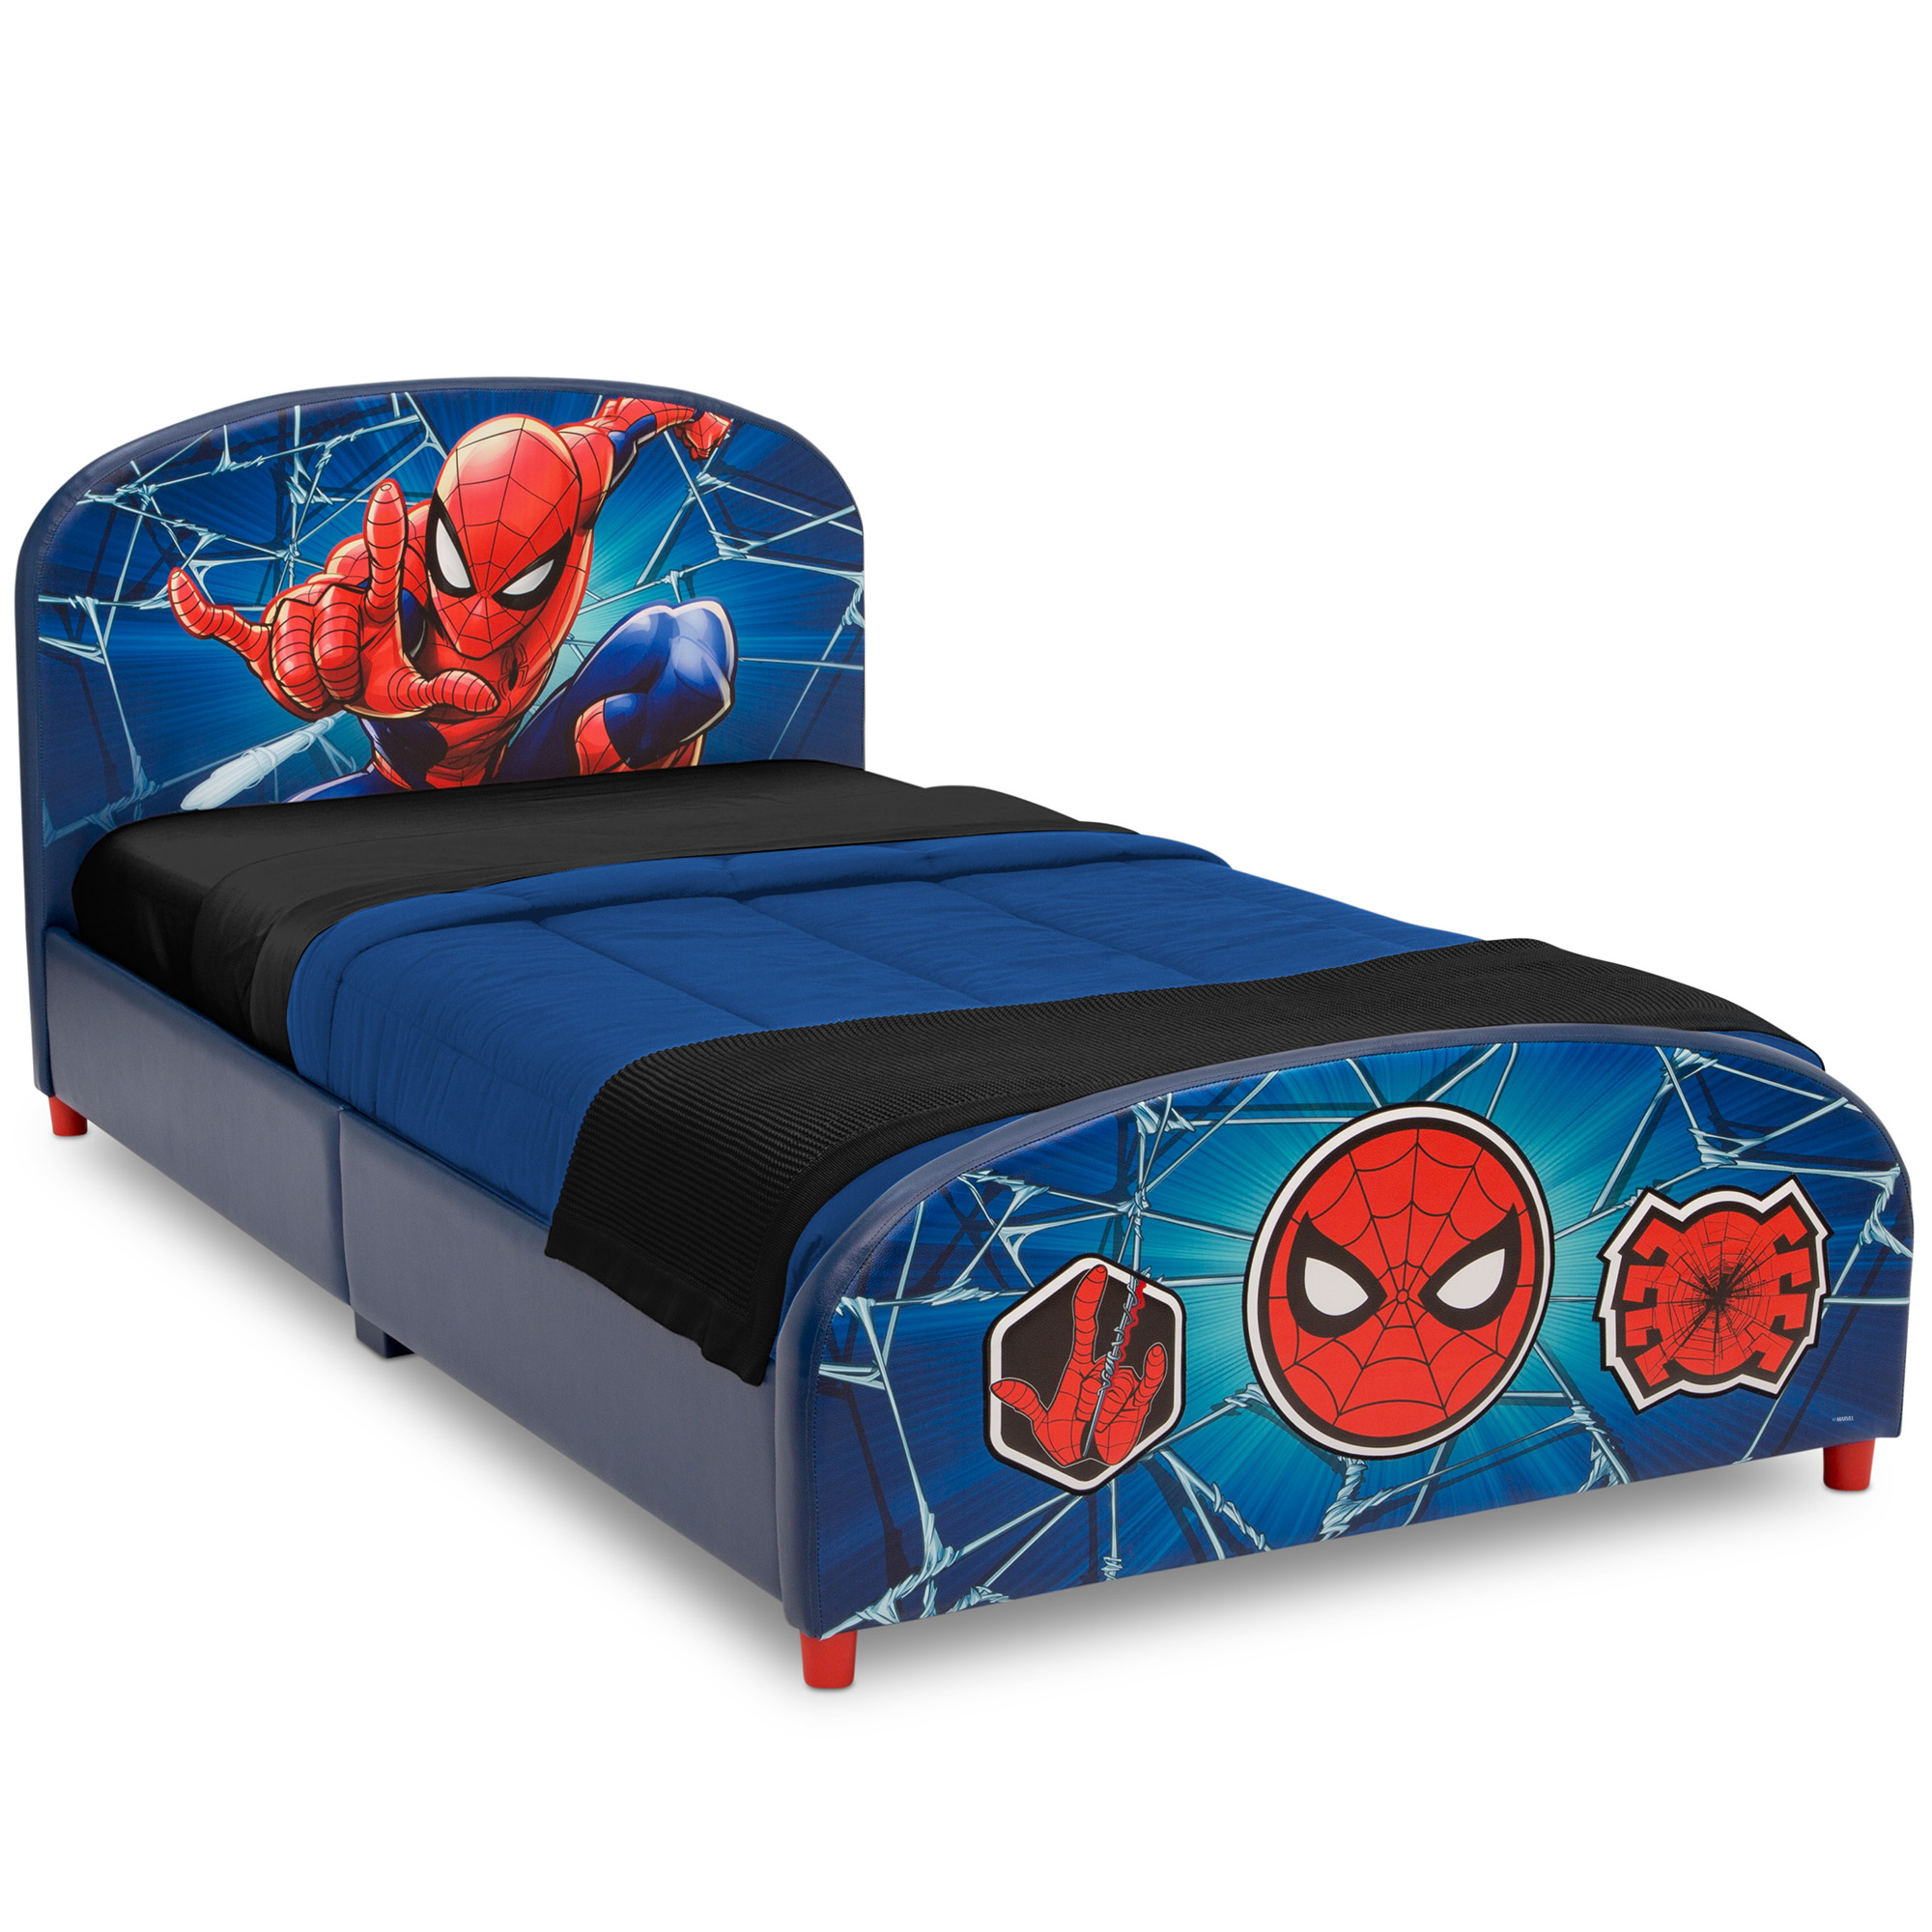 Buy Letto gemello Marvel Spider-Man Online Italy